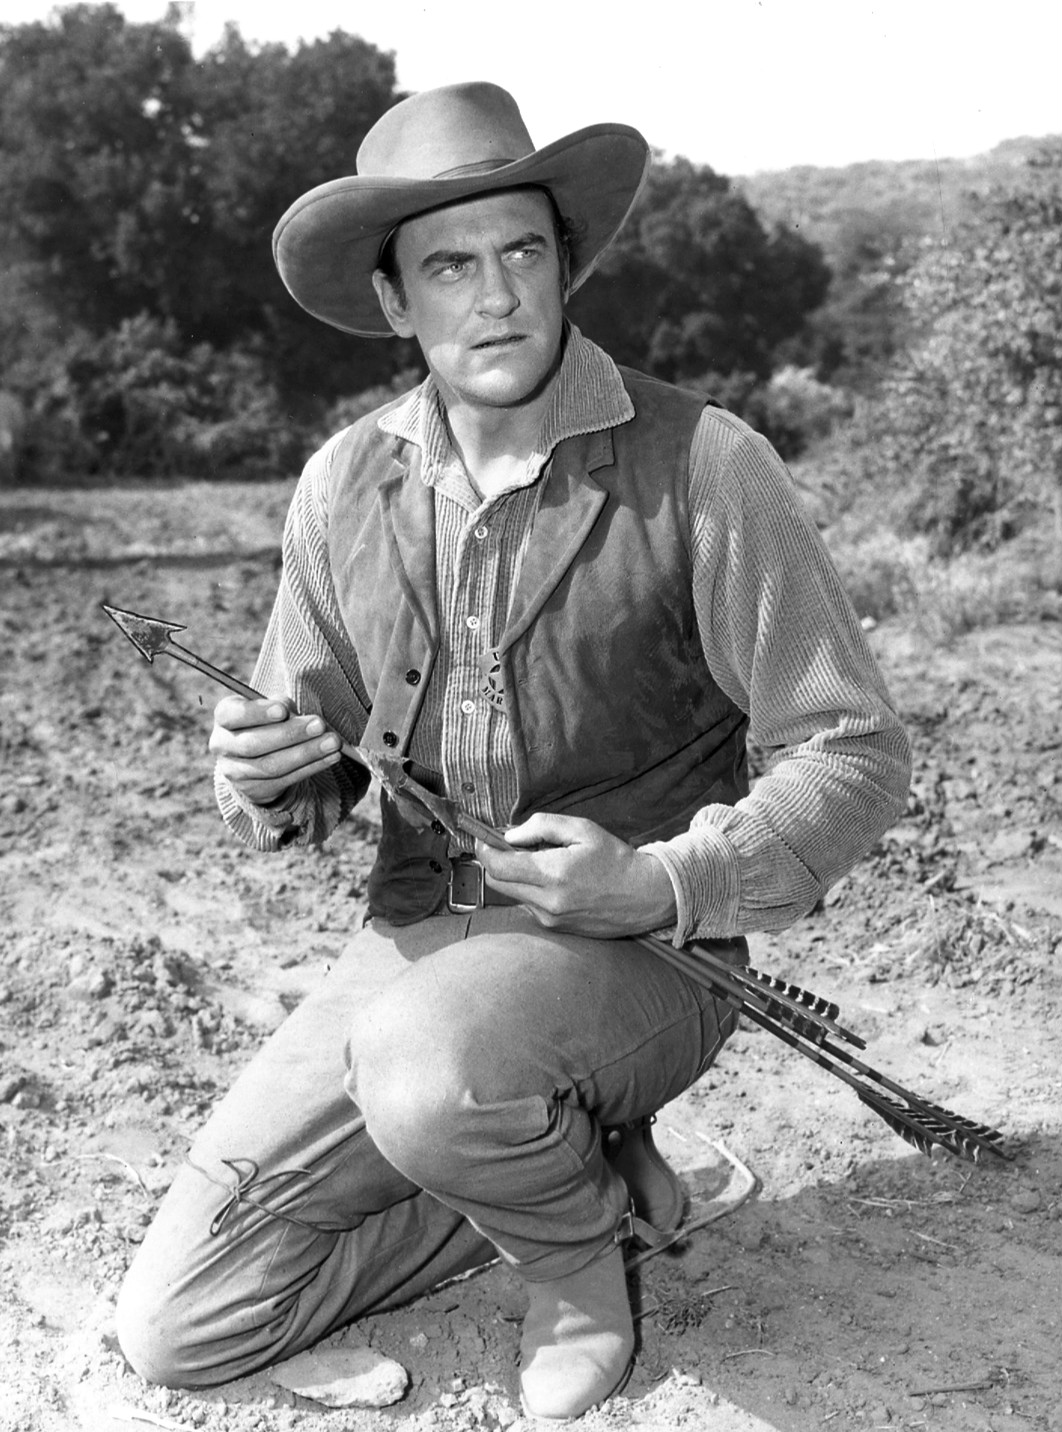 James Arness was badly wounded at Anzio, but survived to star in the television Western, Gunsmoke